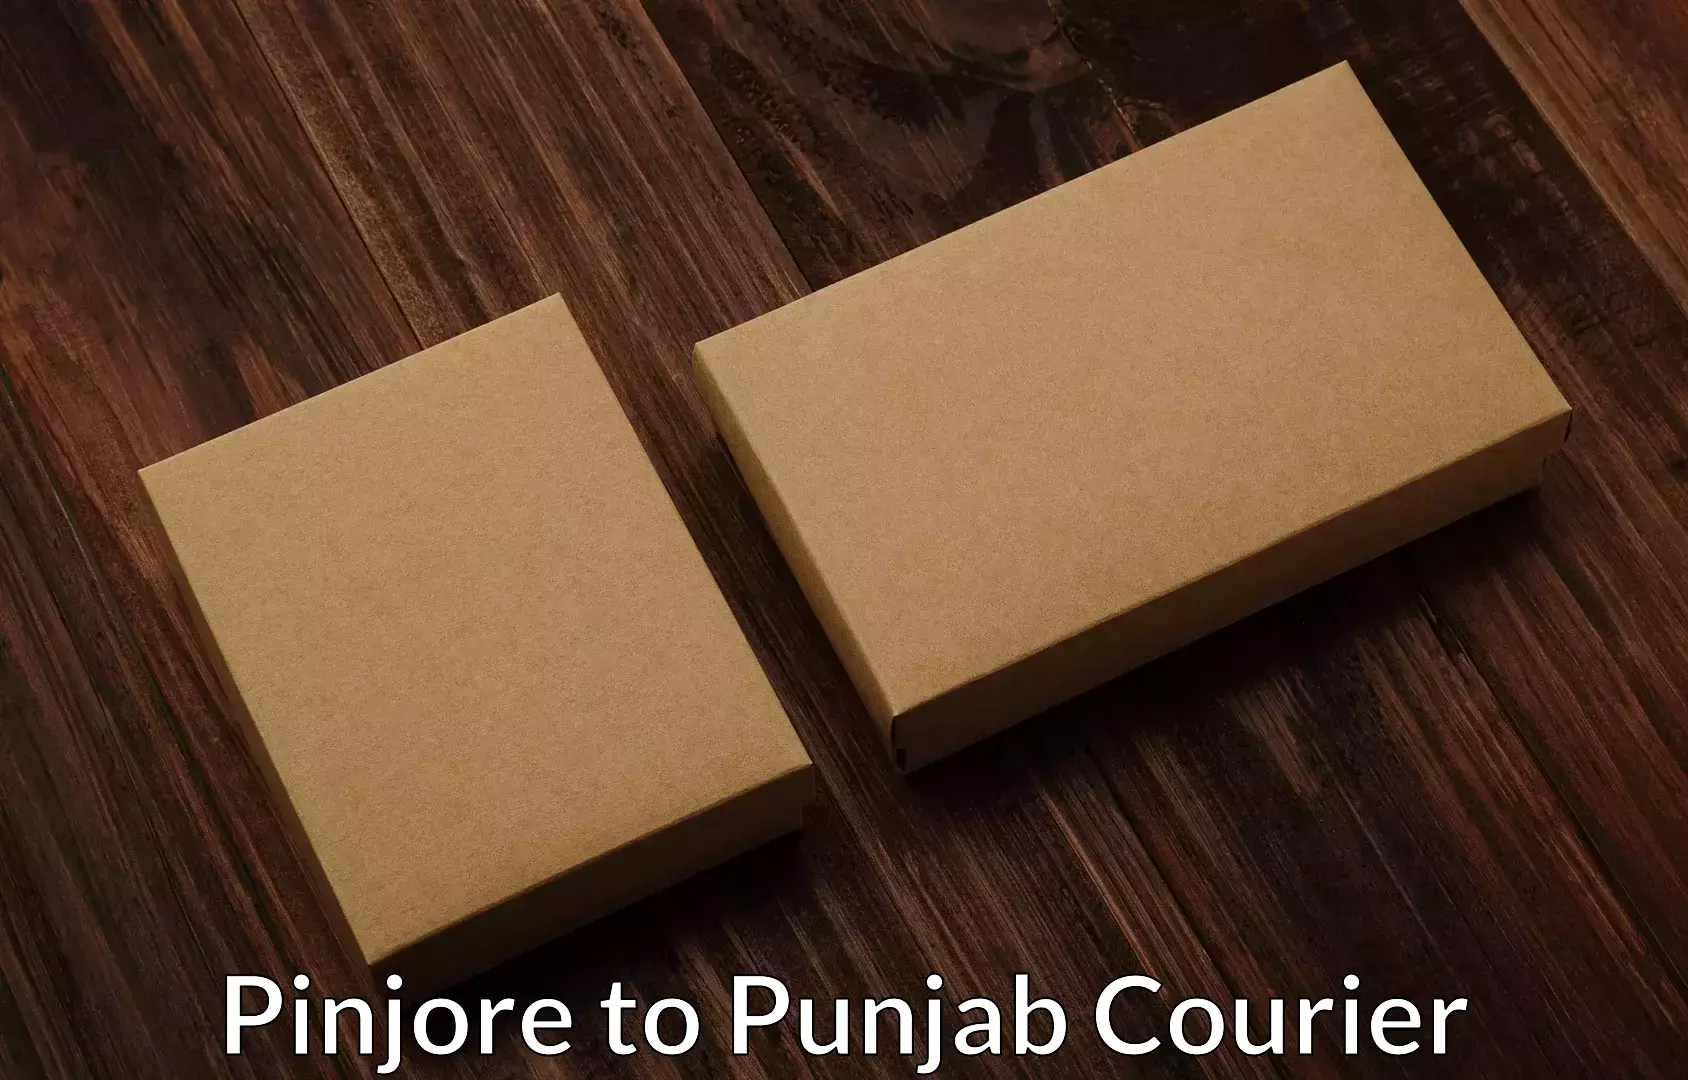 Professional furniture transport in Pinjore to Malout